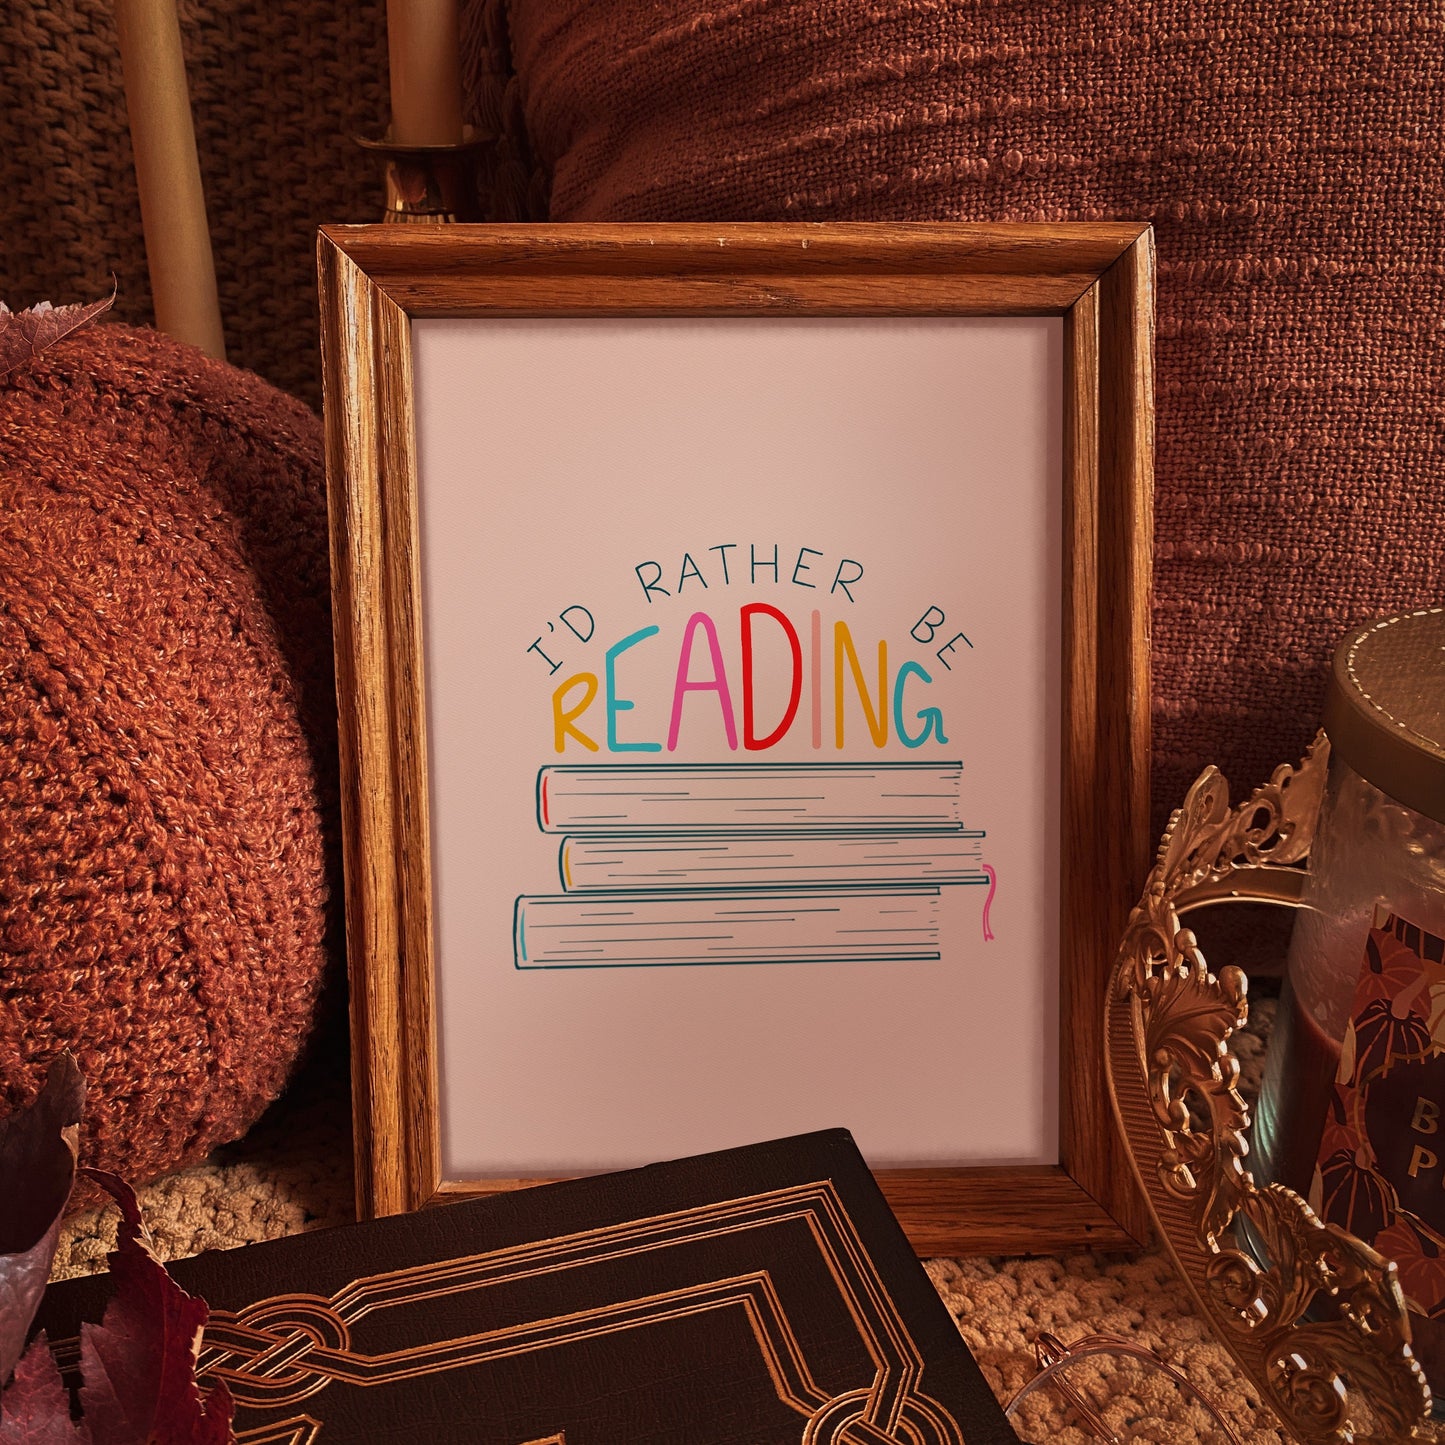 "Rather Be Reading" Print